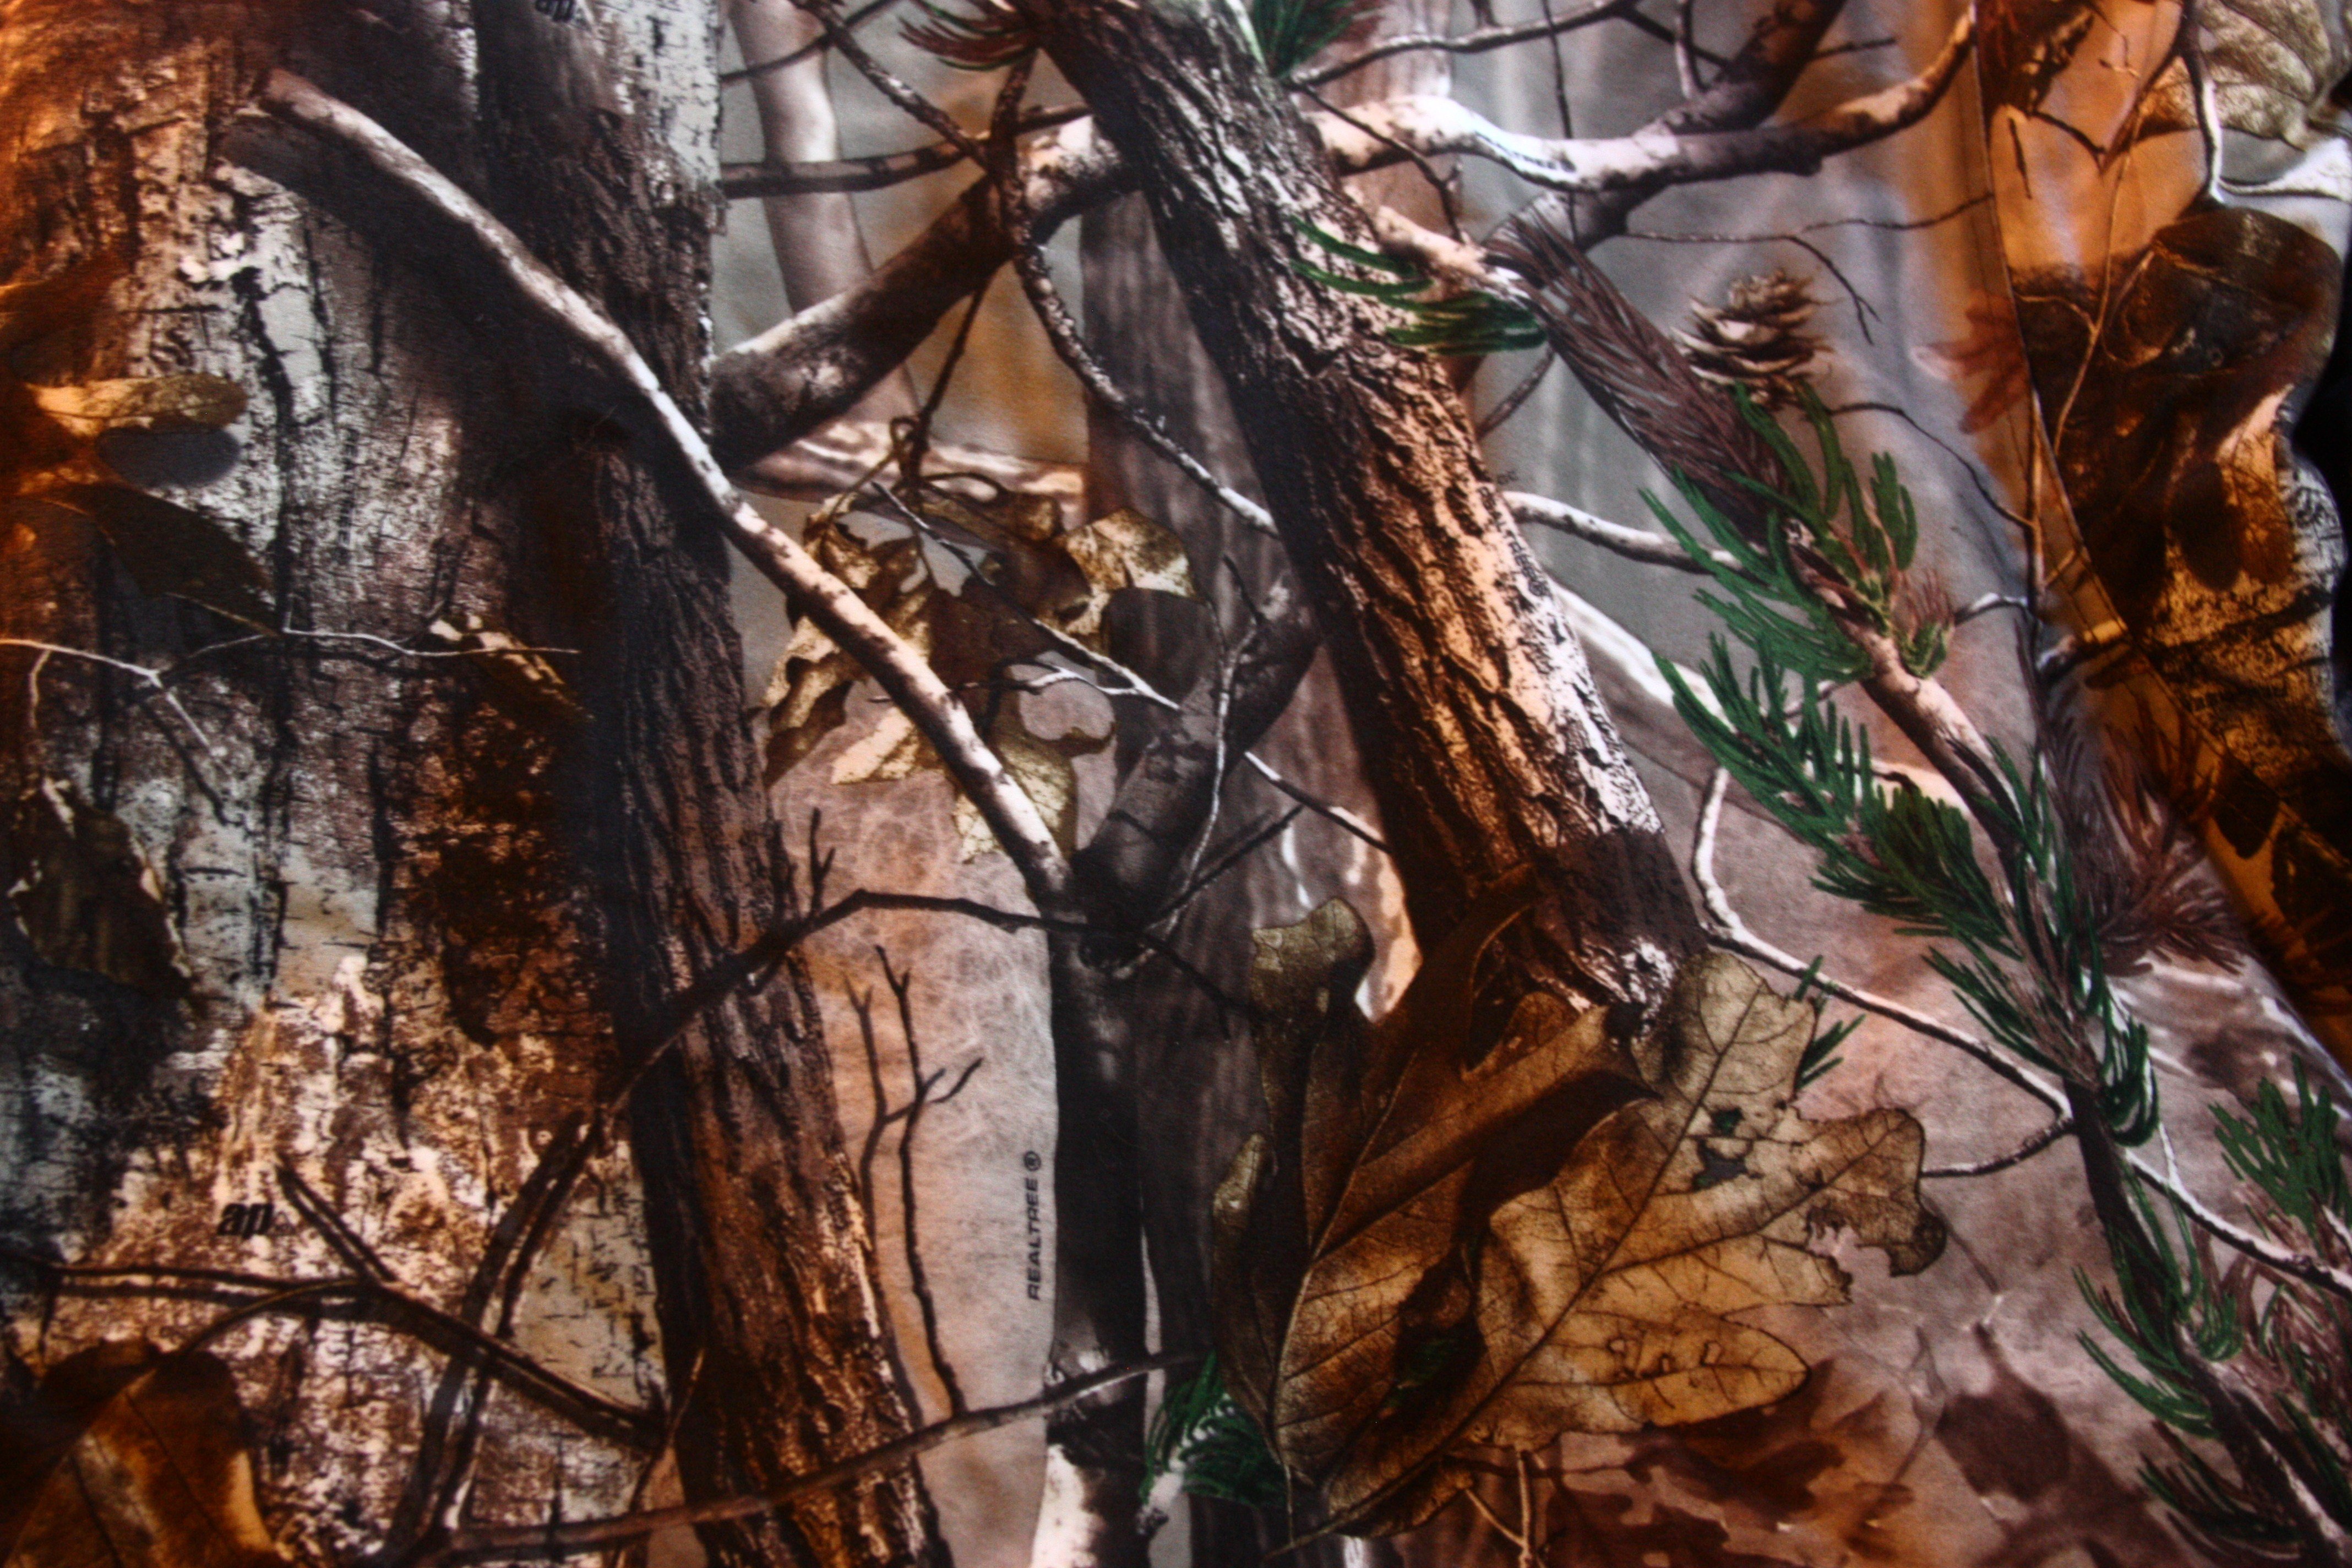 Realtree Camouflage Backgrounds of The Realtree Camouflage